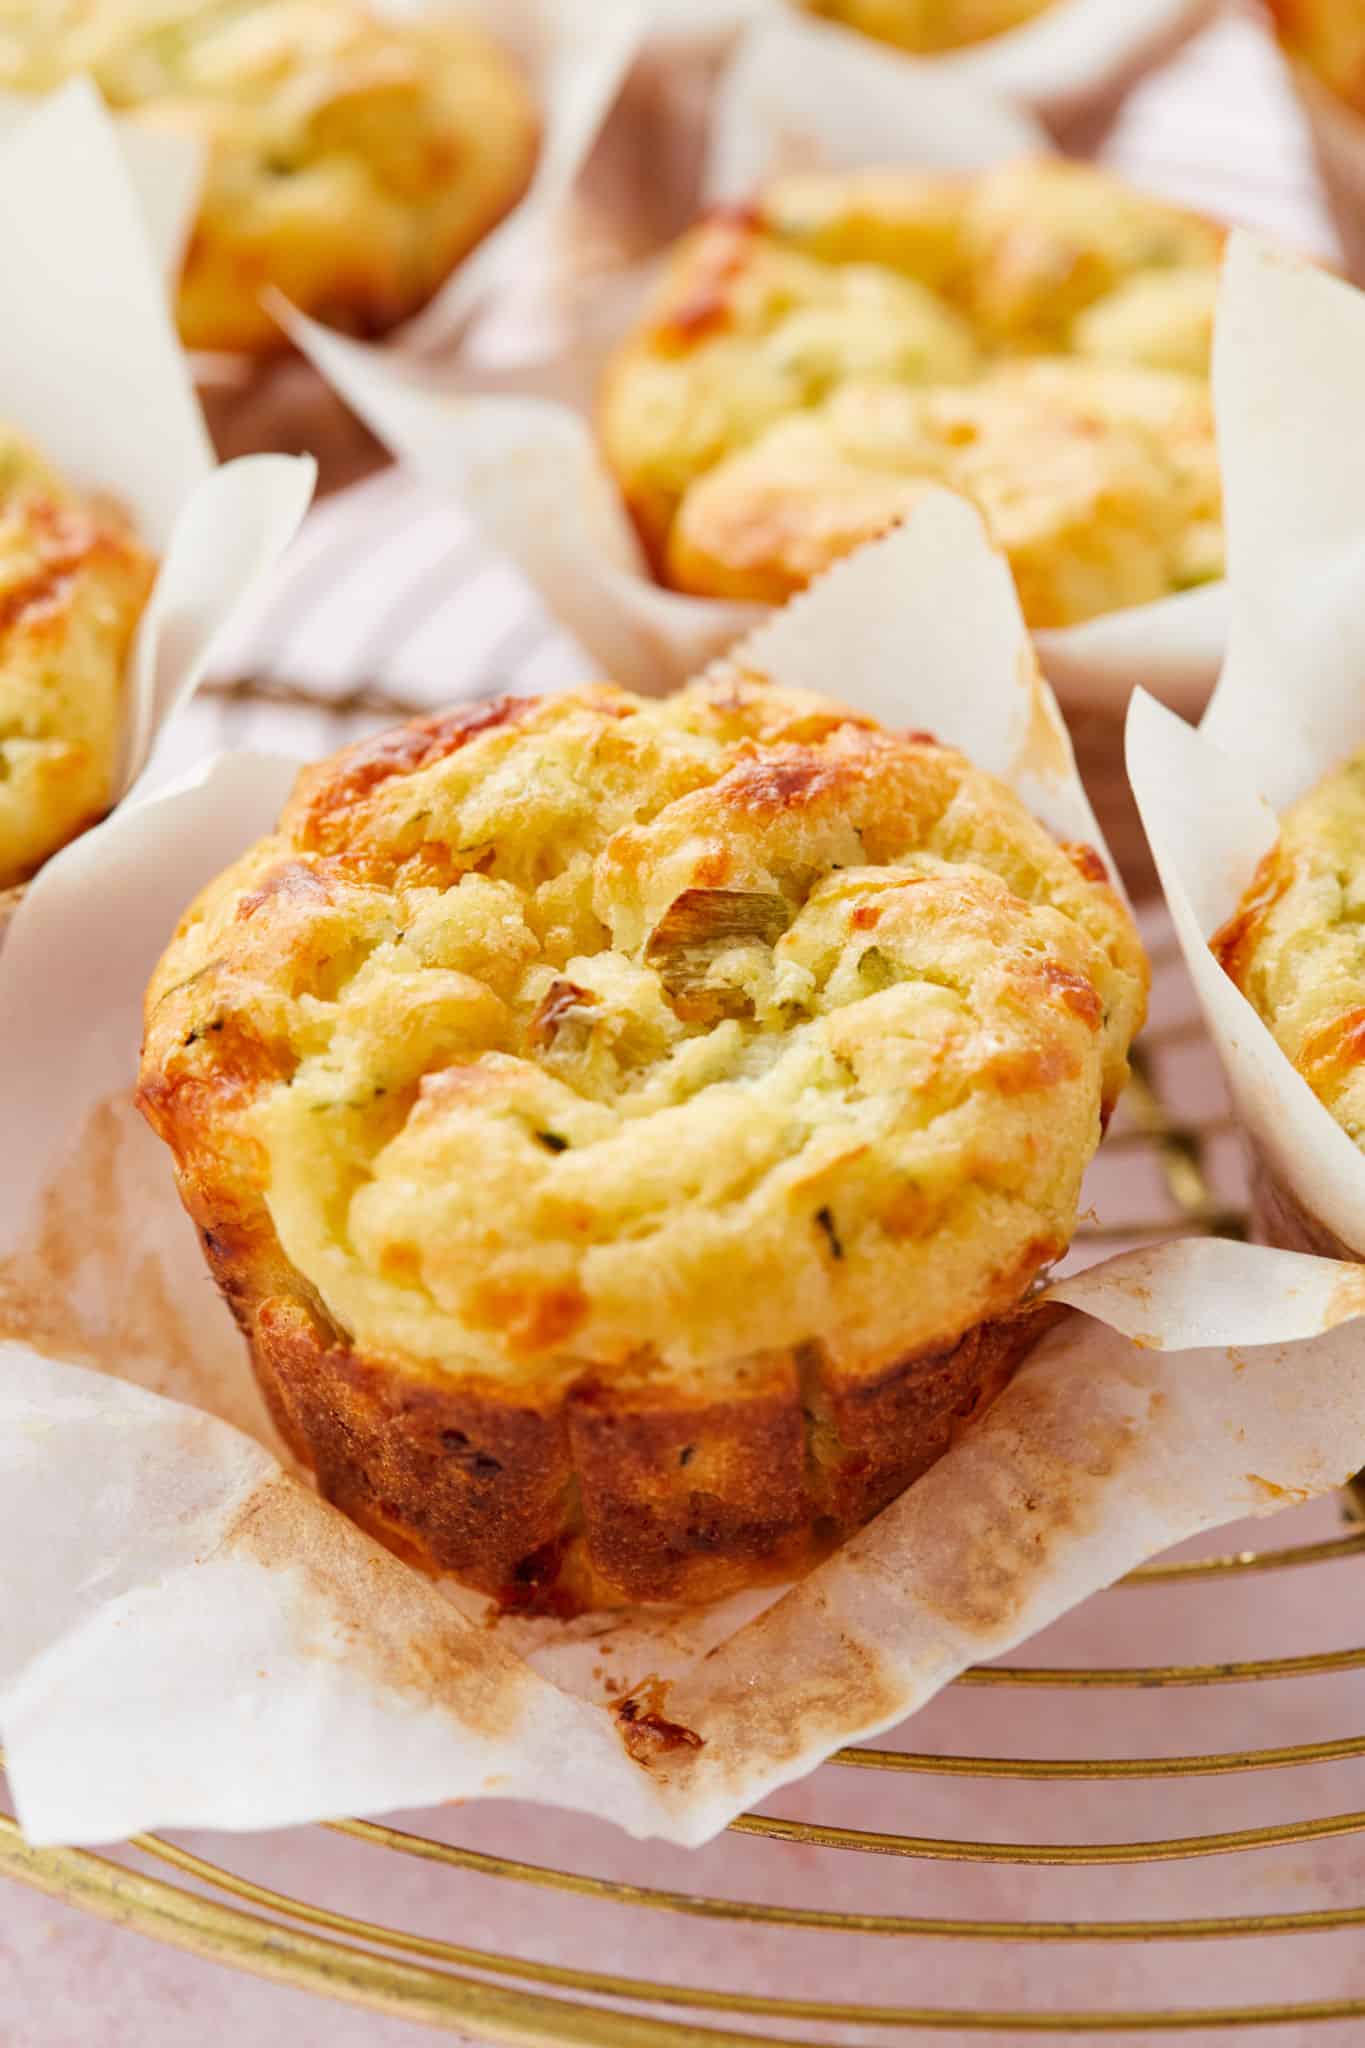 Zucchini and Cheese Muffin unwrapped.